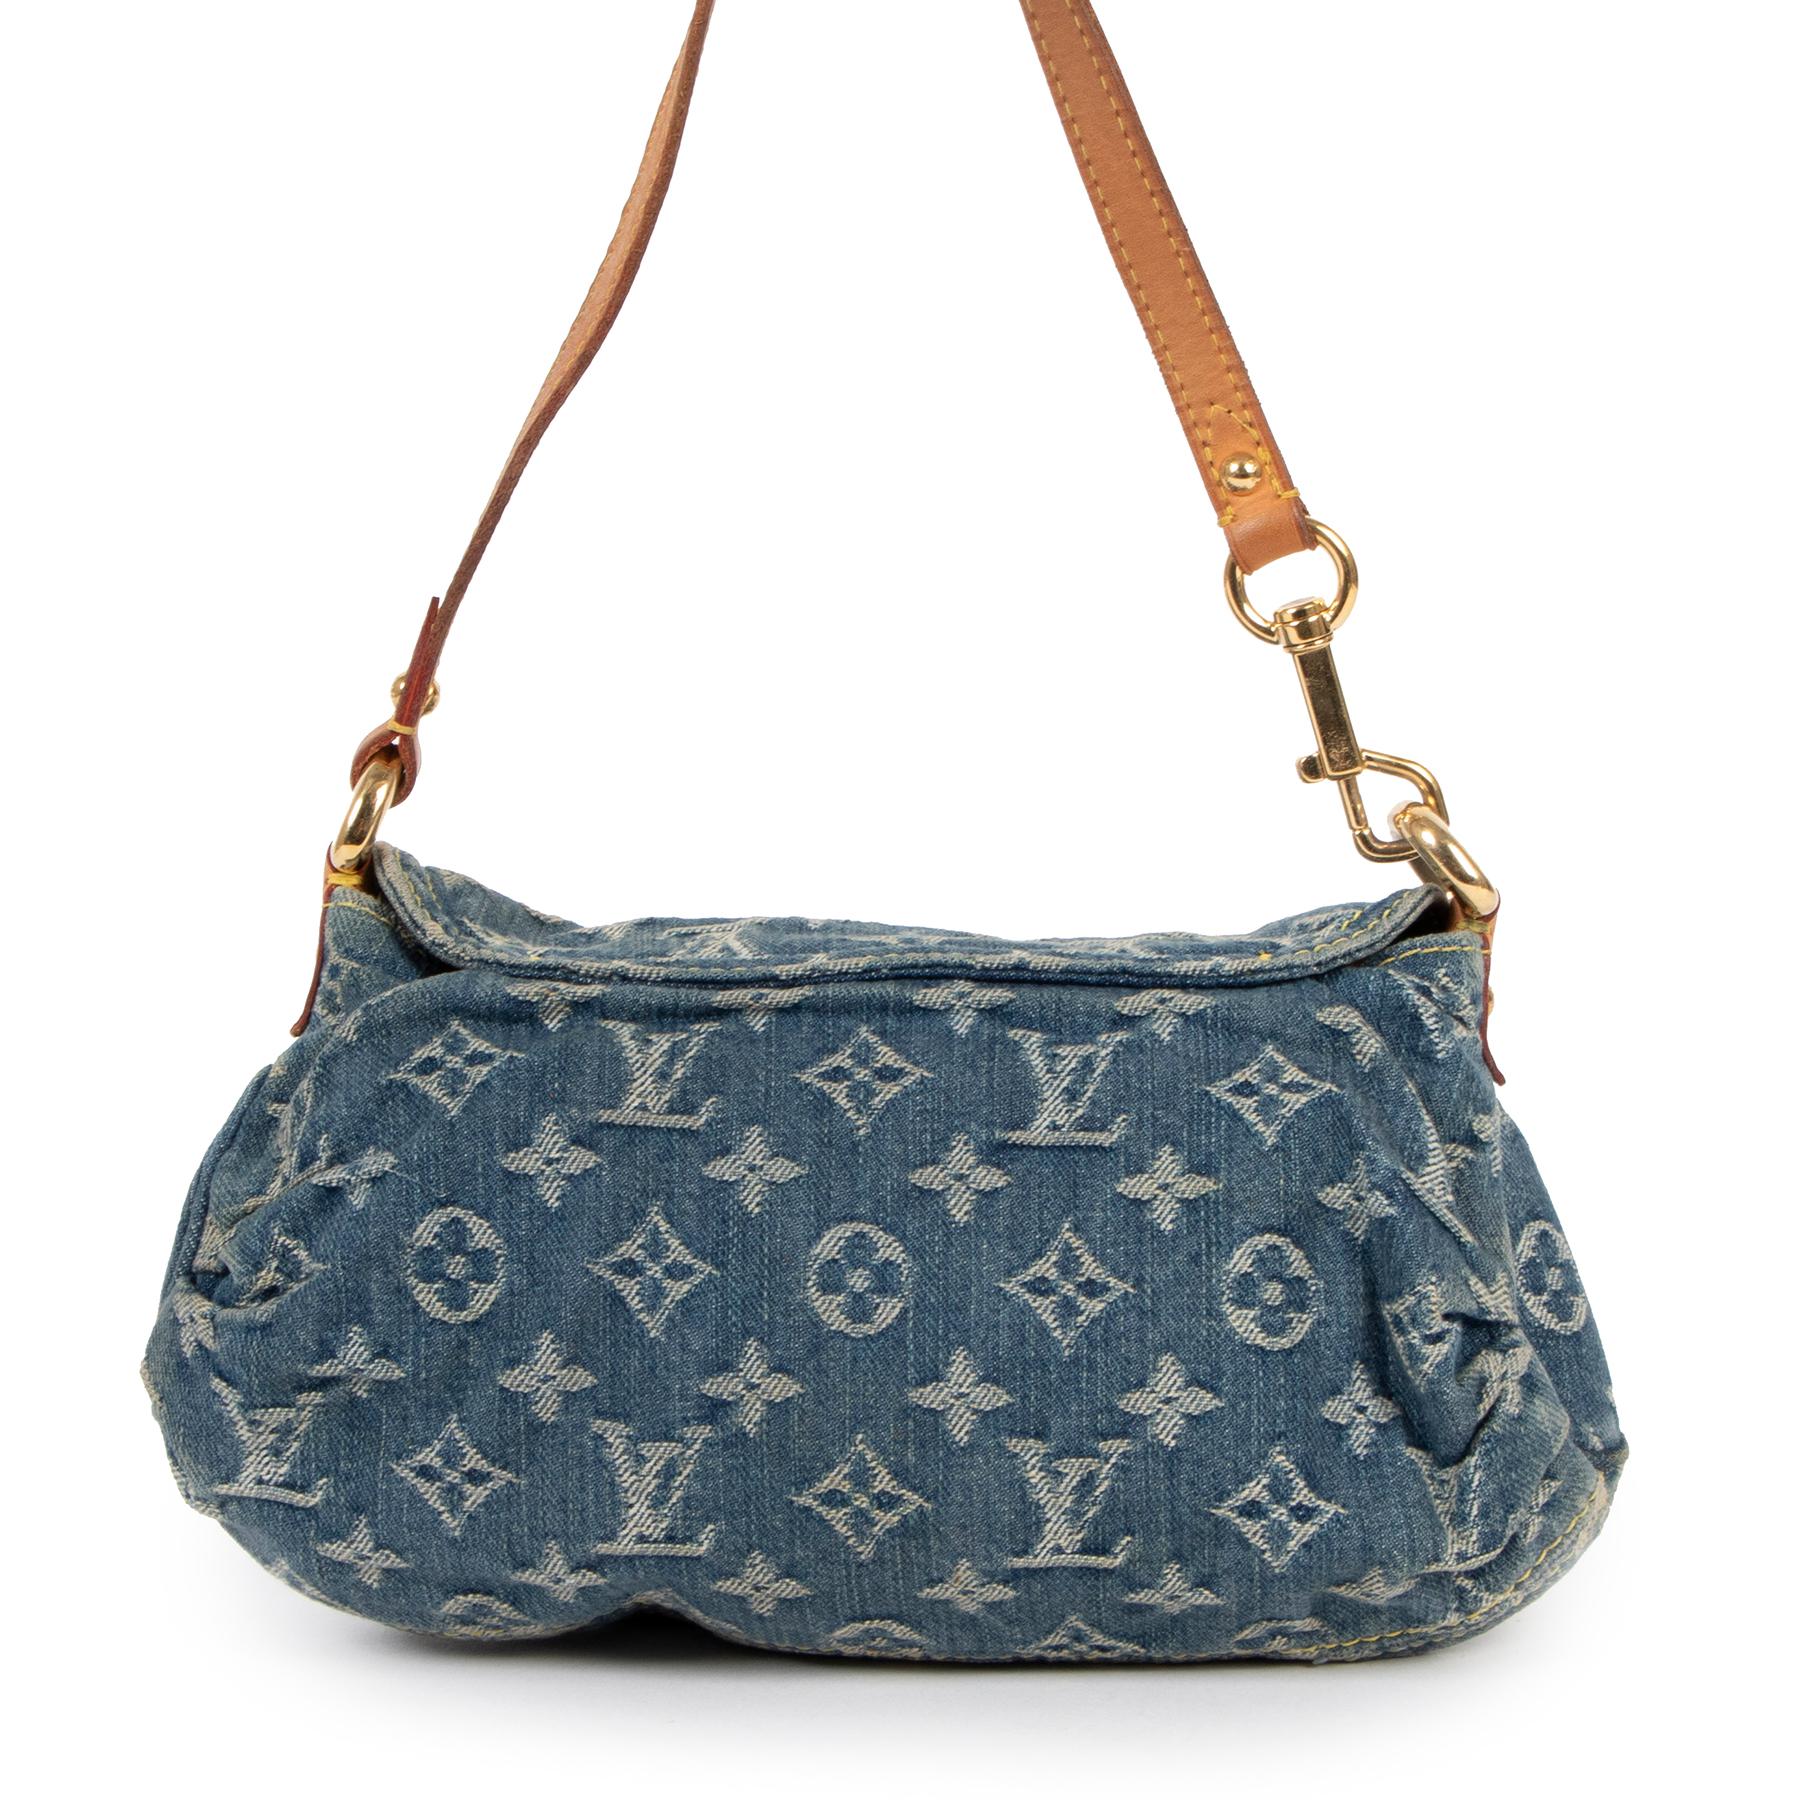 Louis Vuitton Pleaty Blue Denim Baguette
We just love this limited Louis Vuitton Pleaty Baguette bag. The bag features monogram in a lighter jeans color and a vachetta leather shoudler strap.
Open the bag up with the gold plated button to reveal a